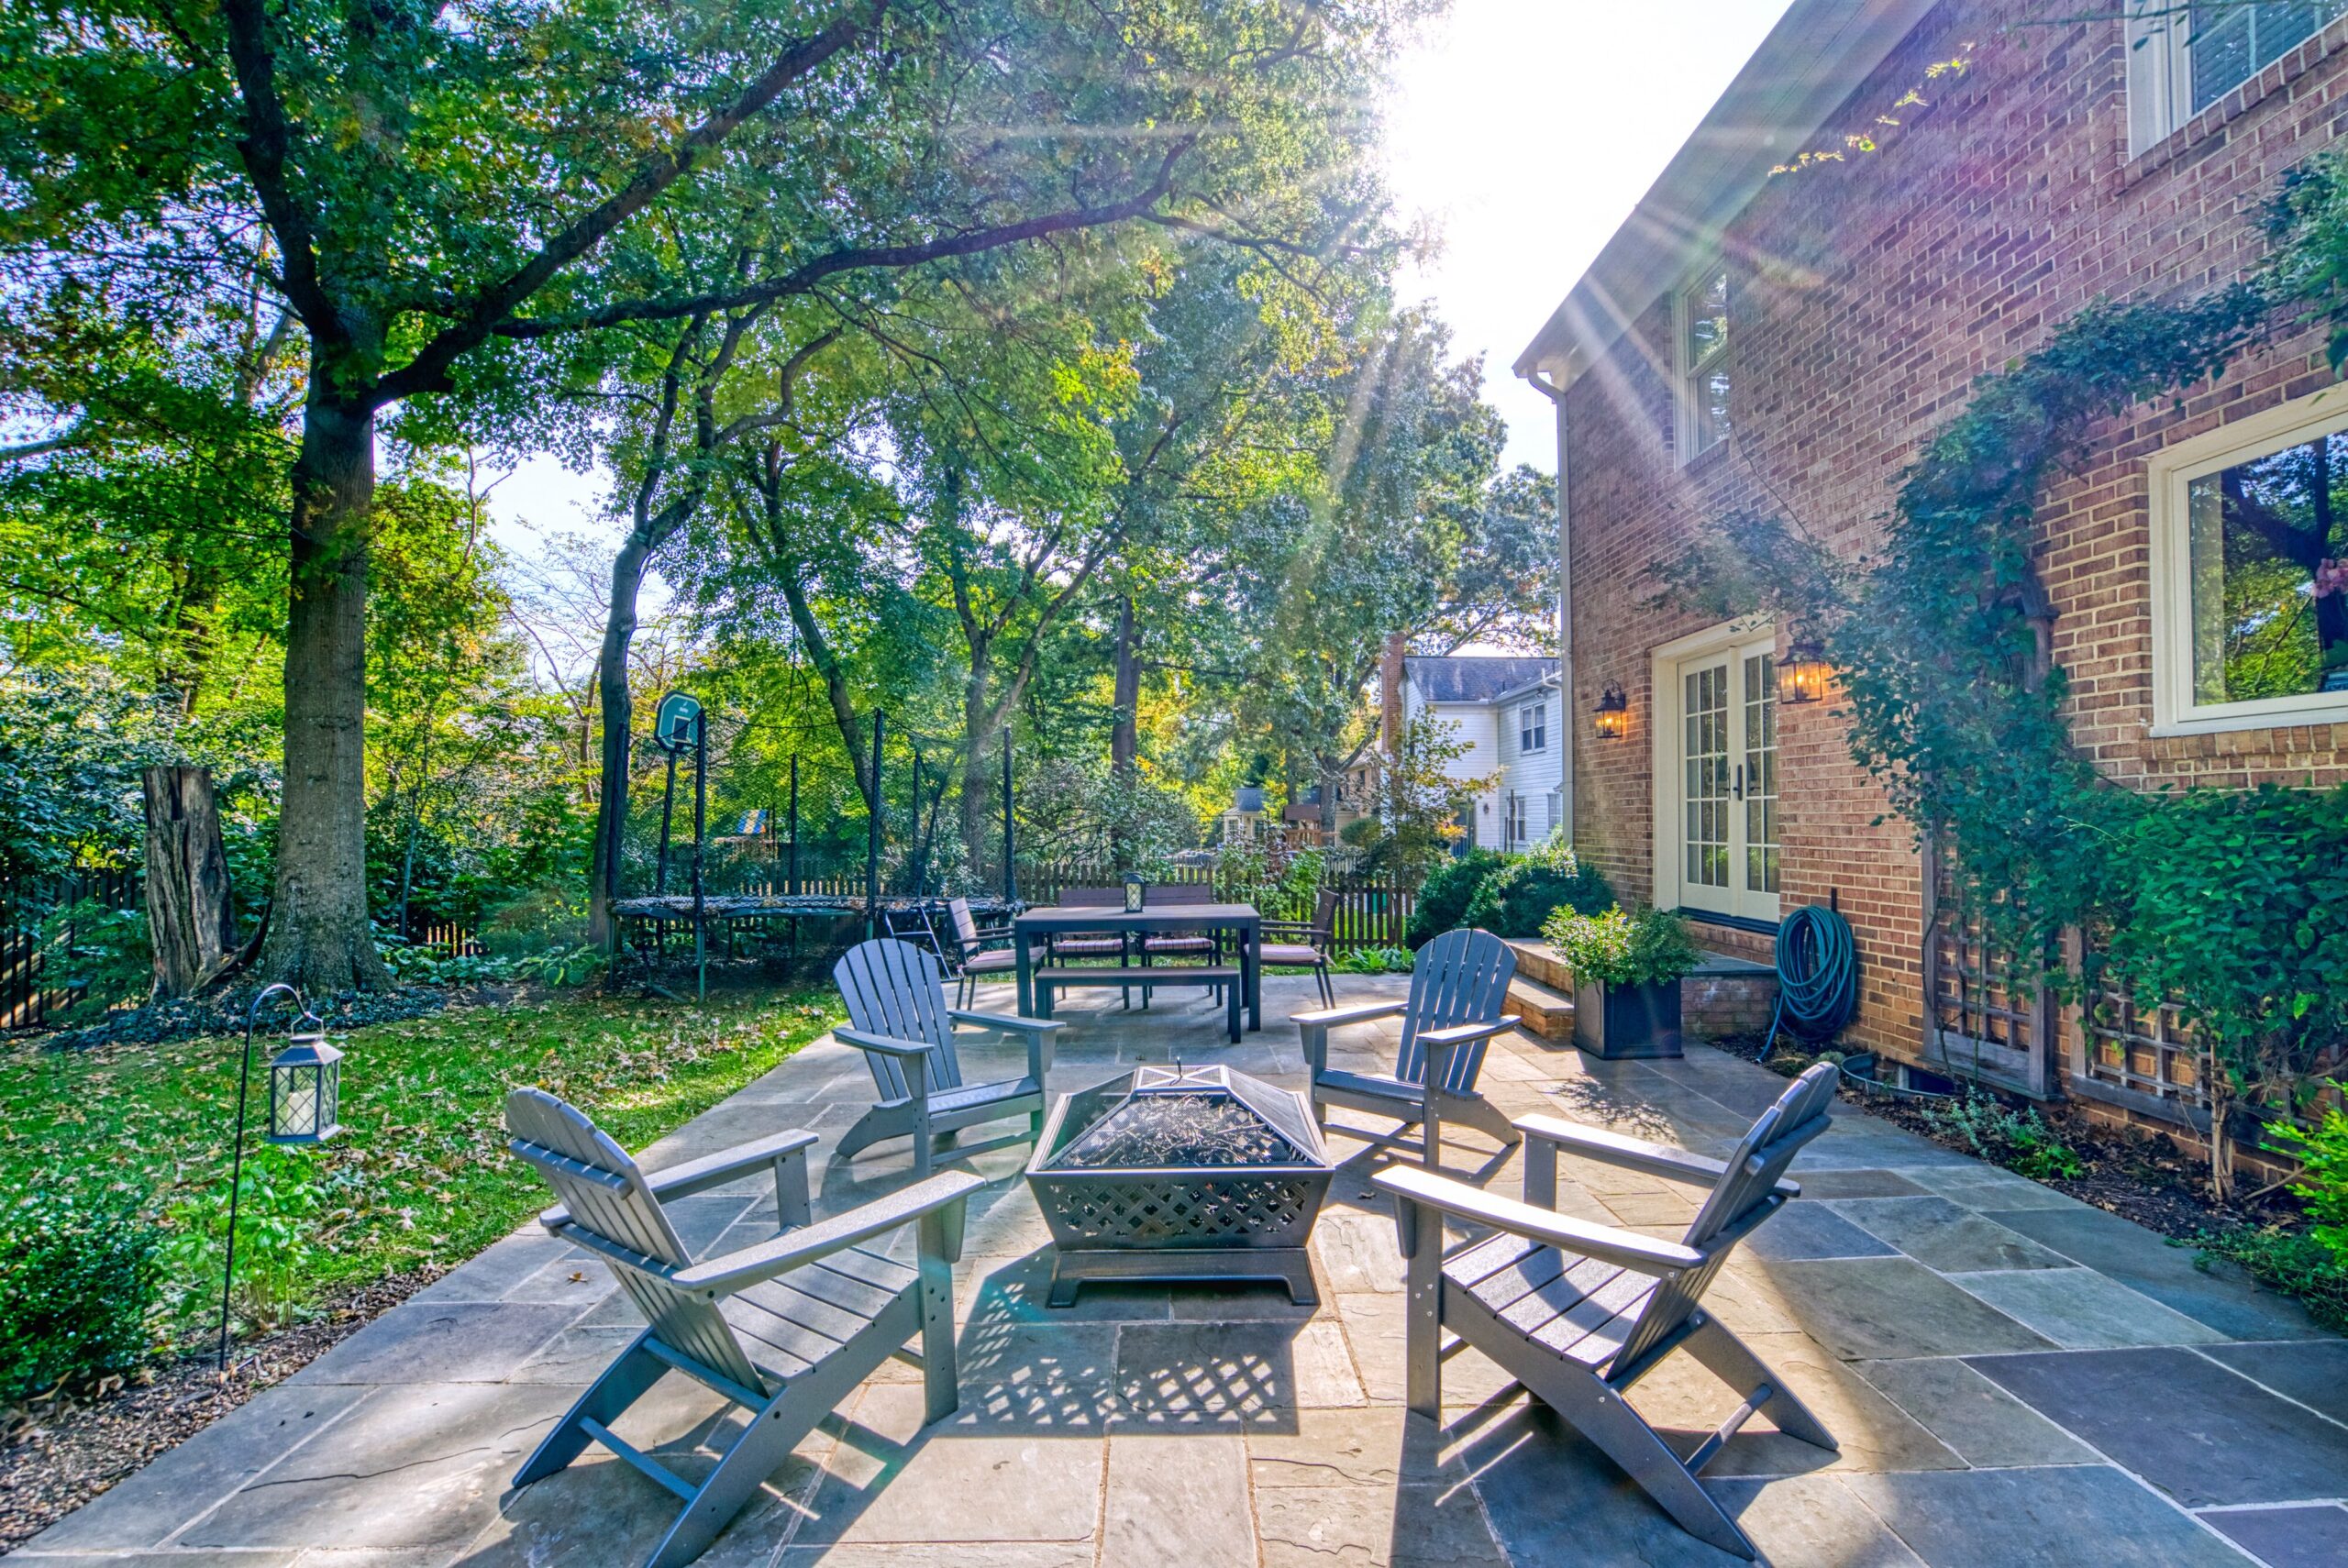 Professional exterior photo of 8305 River Falls Dr, Potomac, MD - rear patio with adirondack chairs around a fire pit with rays of sunshine